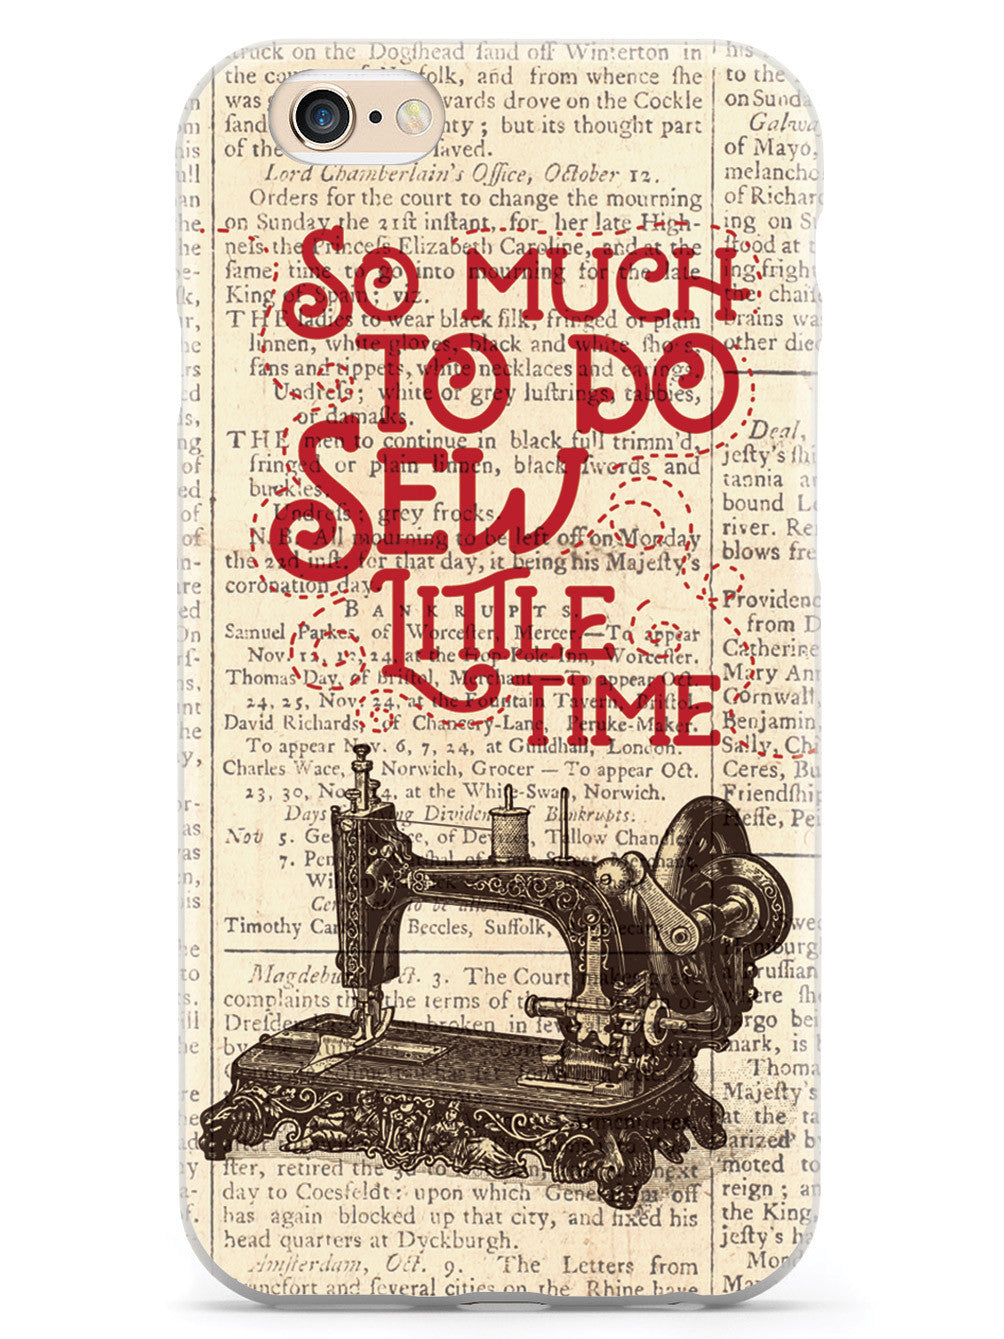 So Much To Do, Sew Little Time Case